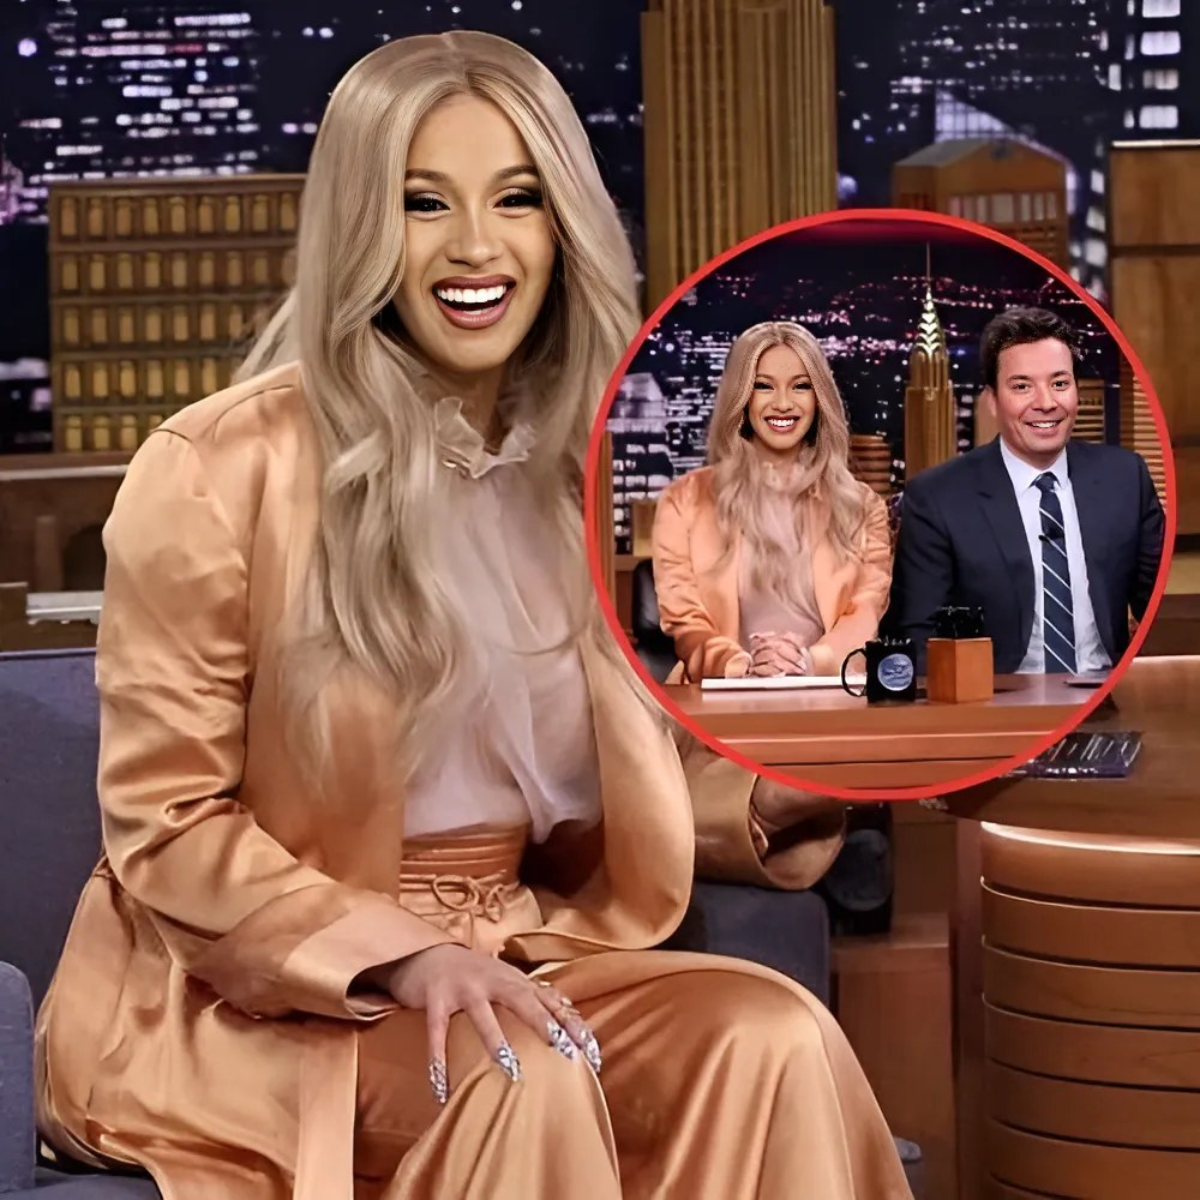 The Best Of Cardi B On The Tonight Show Starring Jimmy Fallon Showcases